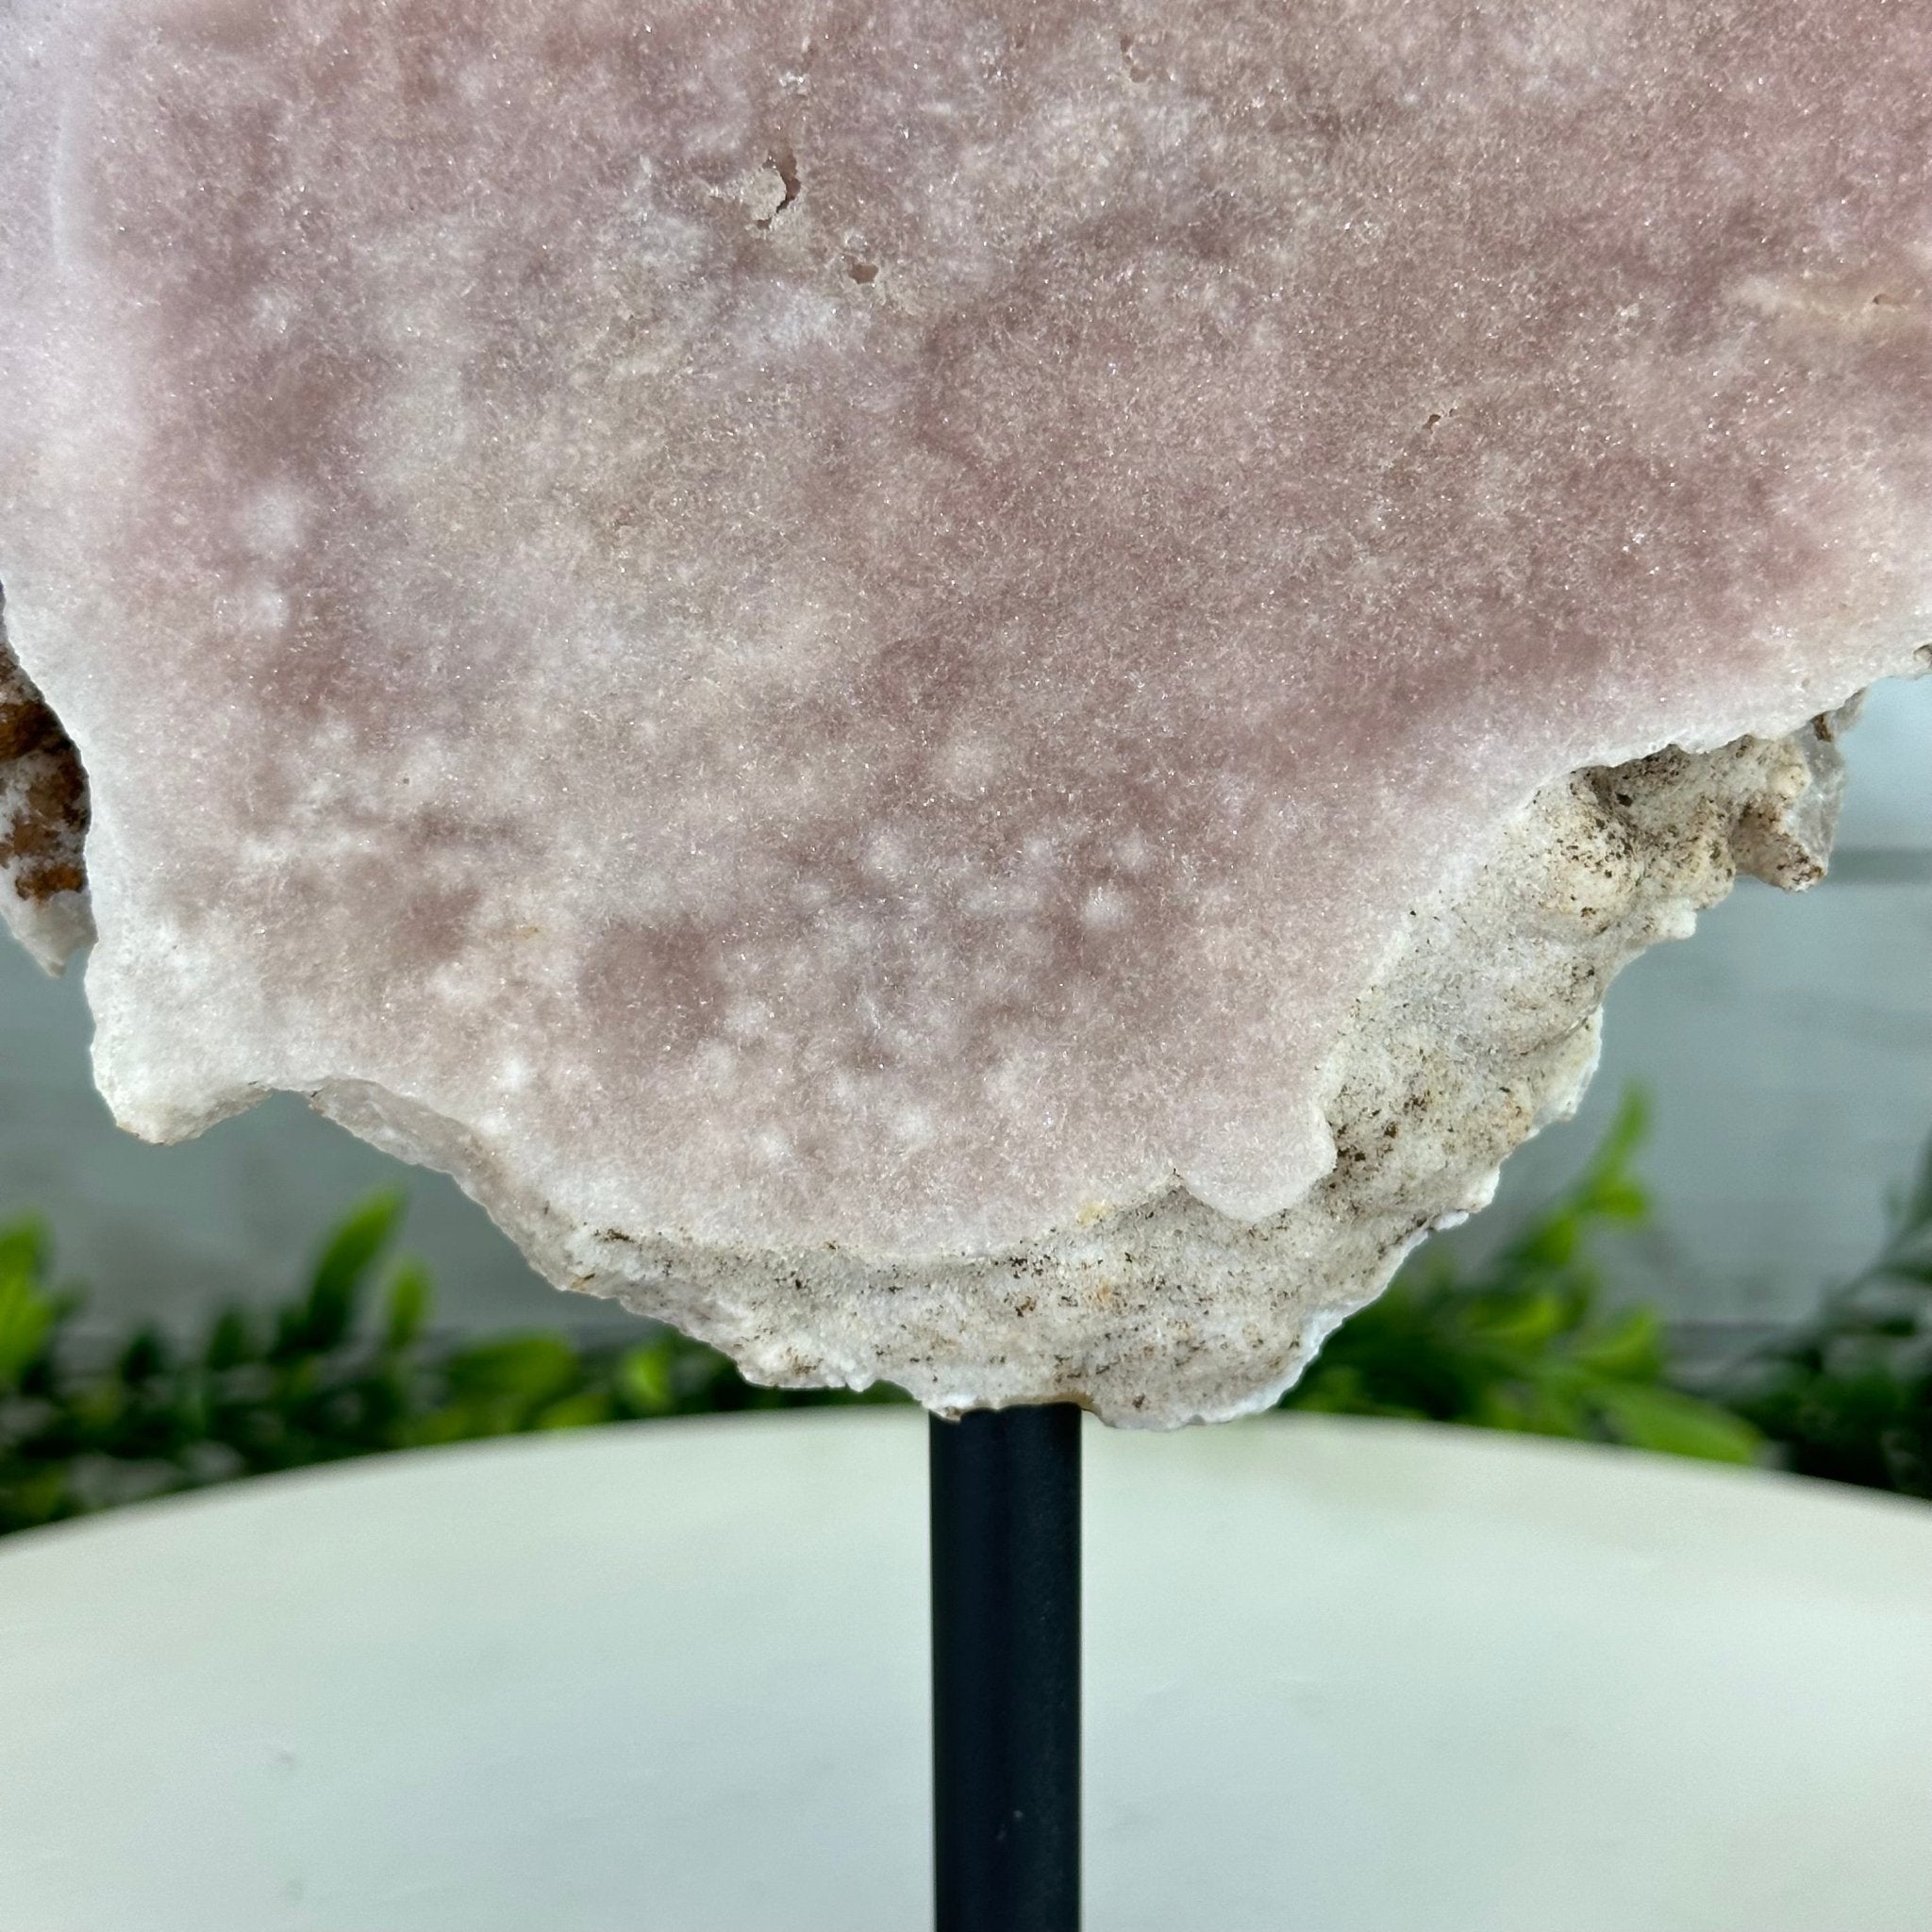 Pink Amethyst Slice on a Stand, 5.7 lbs and 10.2" Tall #5742-0139 - Brazil GemsBrazil GemsPink Amethyst Slice on a Stand, 5.7 lbs and 10.2" Tall #5742-0139Slices on Fixed Bases5742-0139